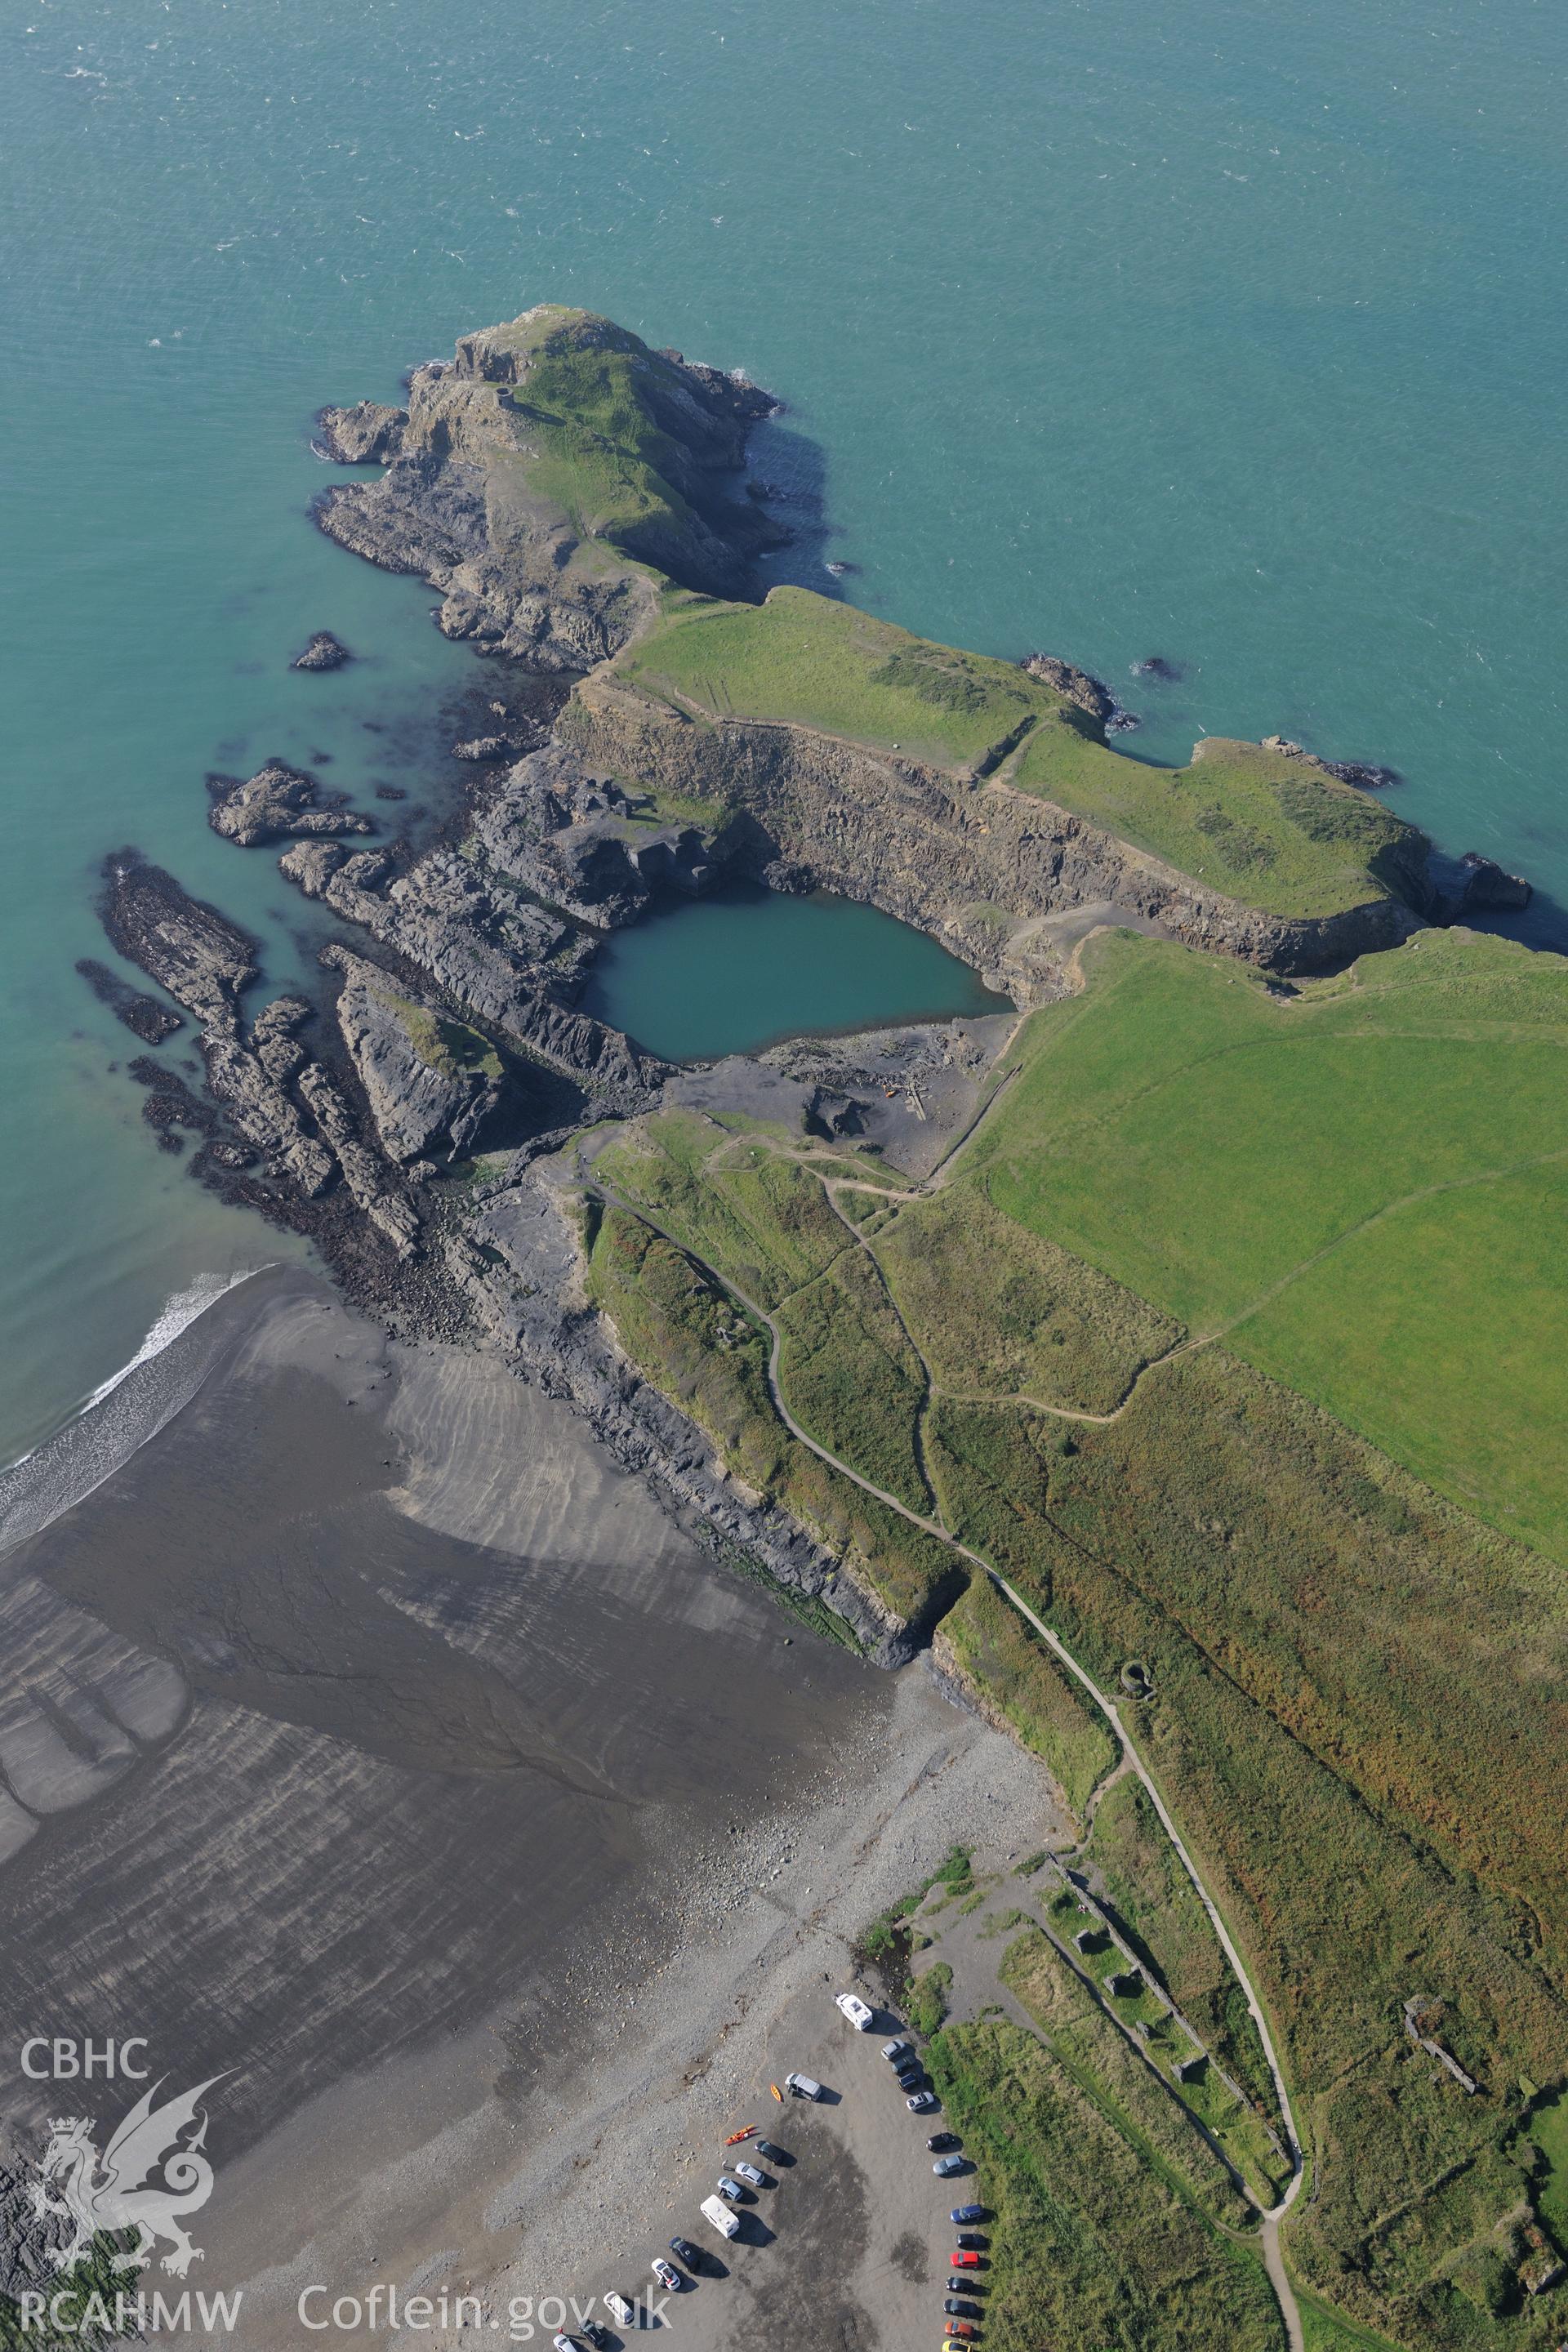 Abereiddi Tower and the remains of Porthgain slate quarry including the quarrymen's cottages; engine house and lift; workshop and what was the main quarry pit, but is now the blue lagoon. Oblique aerial photograph taken during Royal Commission's programme of archaeological aerial reconnaissance by Toby Driver on 30th September 2015.